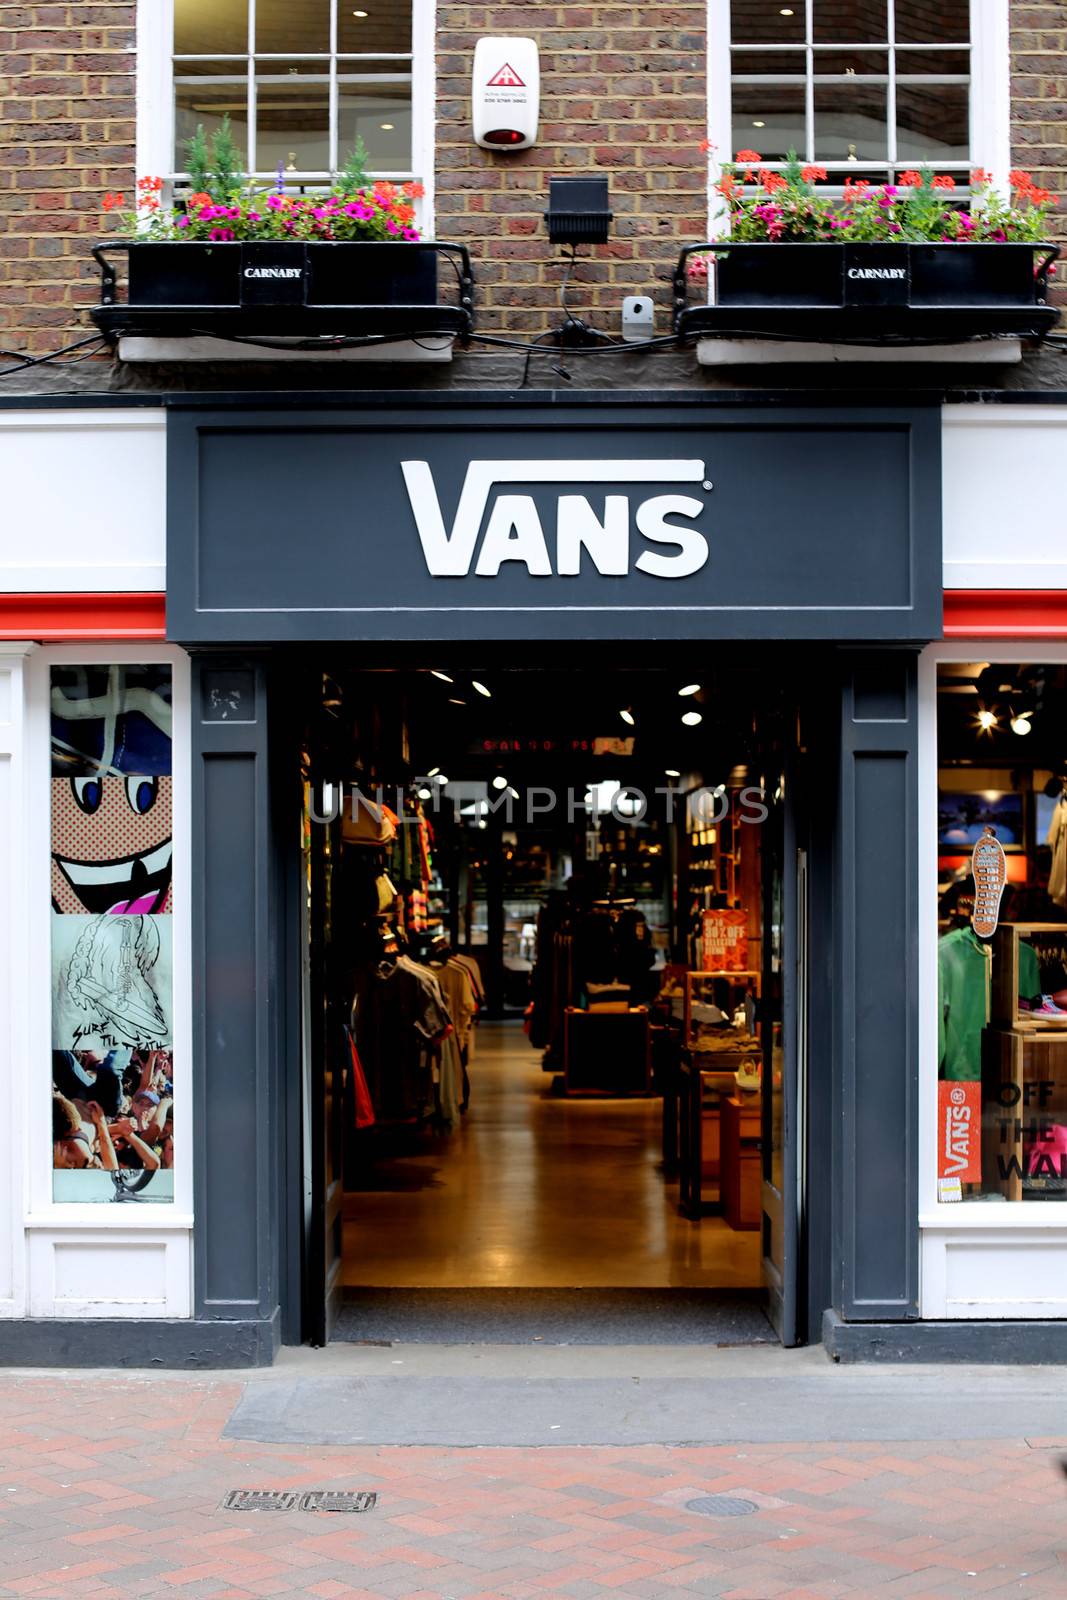 Vans Shop Front Carnaby London by Whiteboxmedia